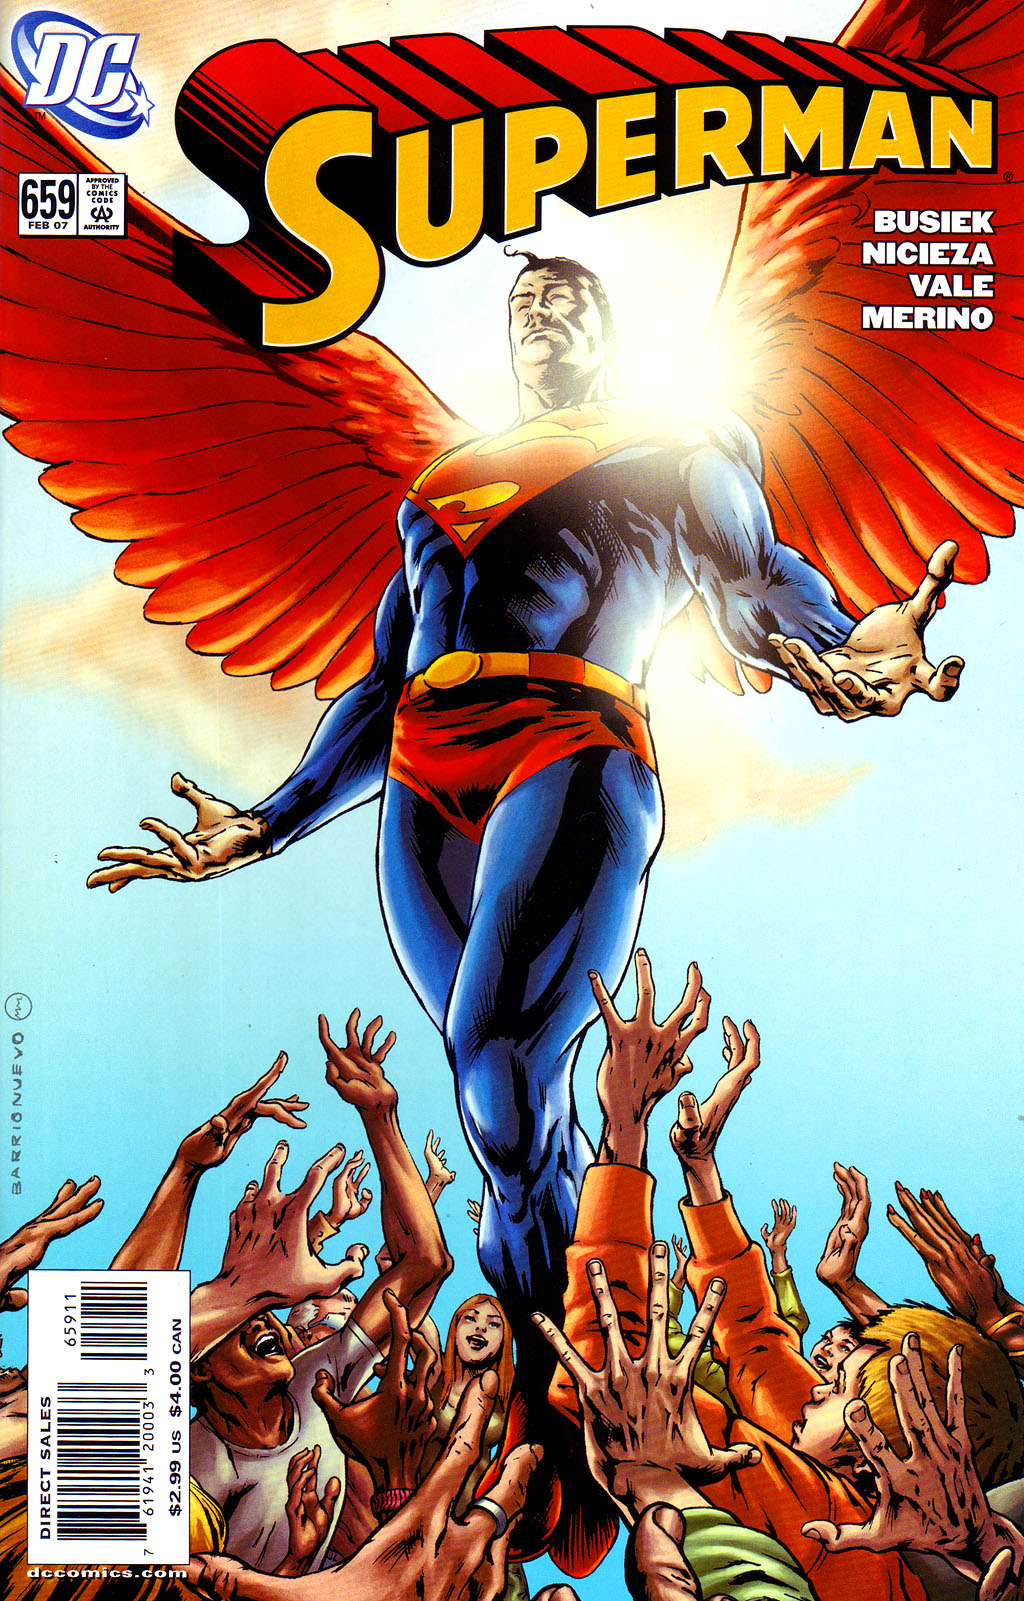 Read online Superman (1939) comic -  Issue #659 - 1